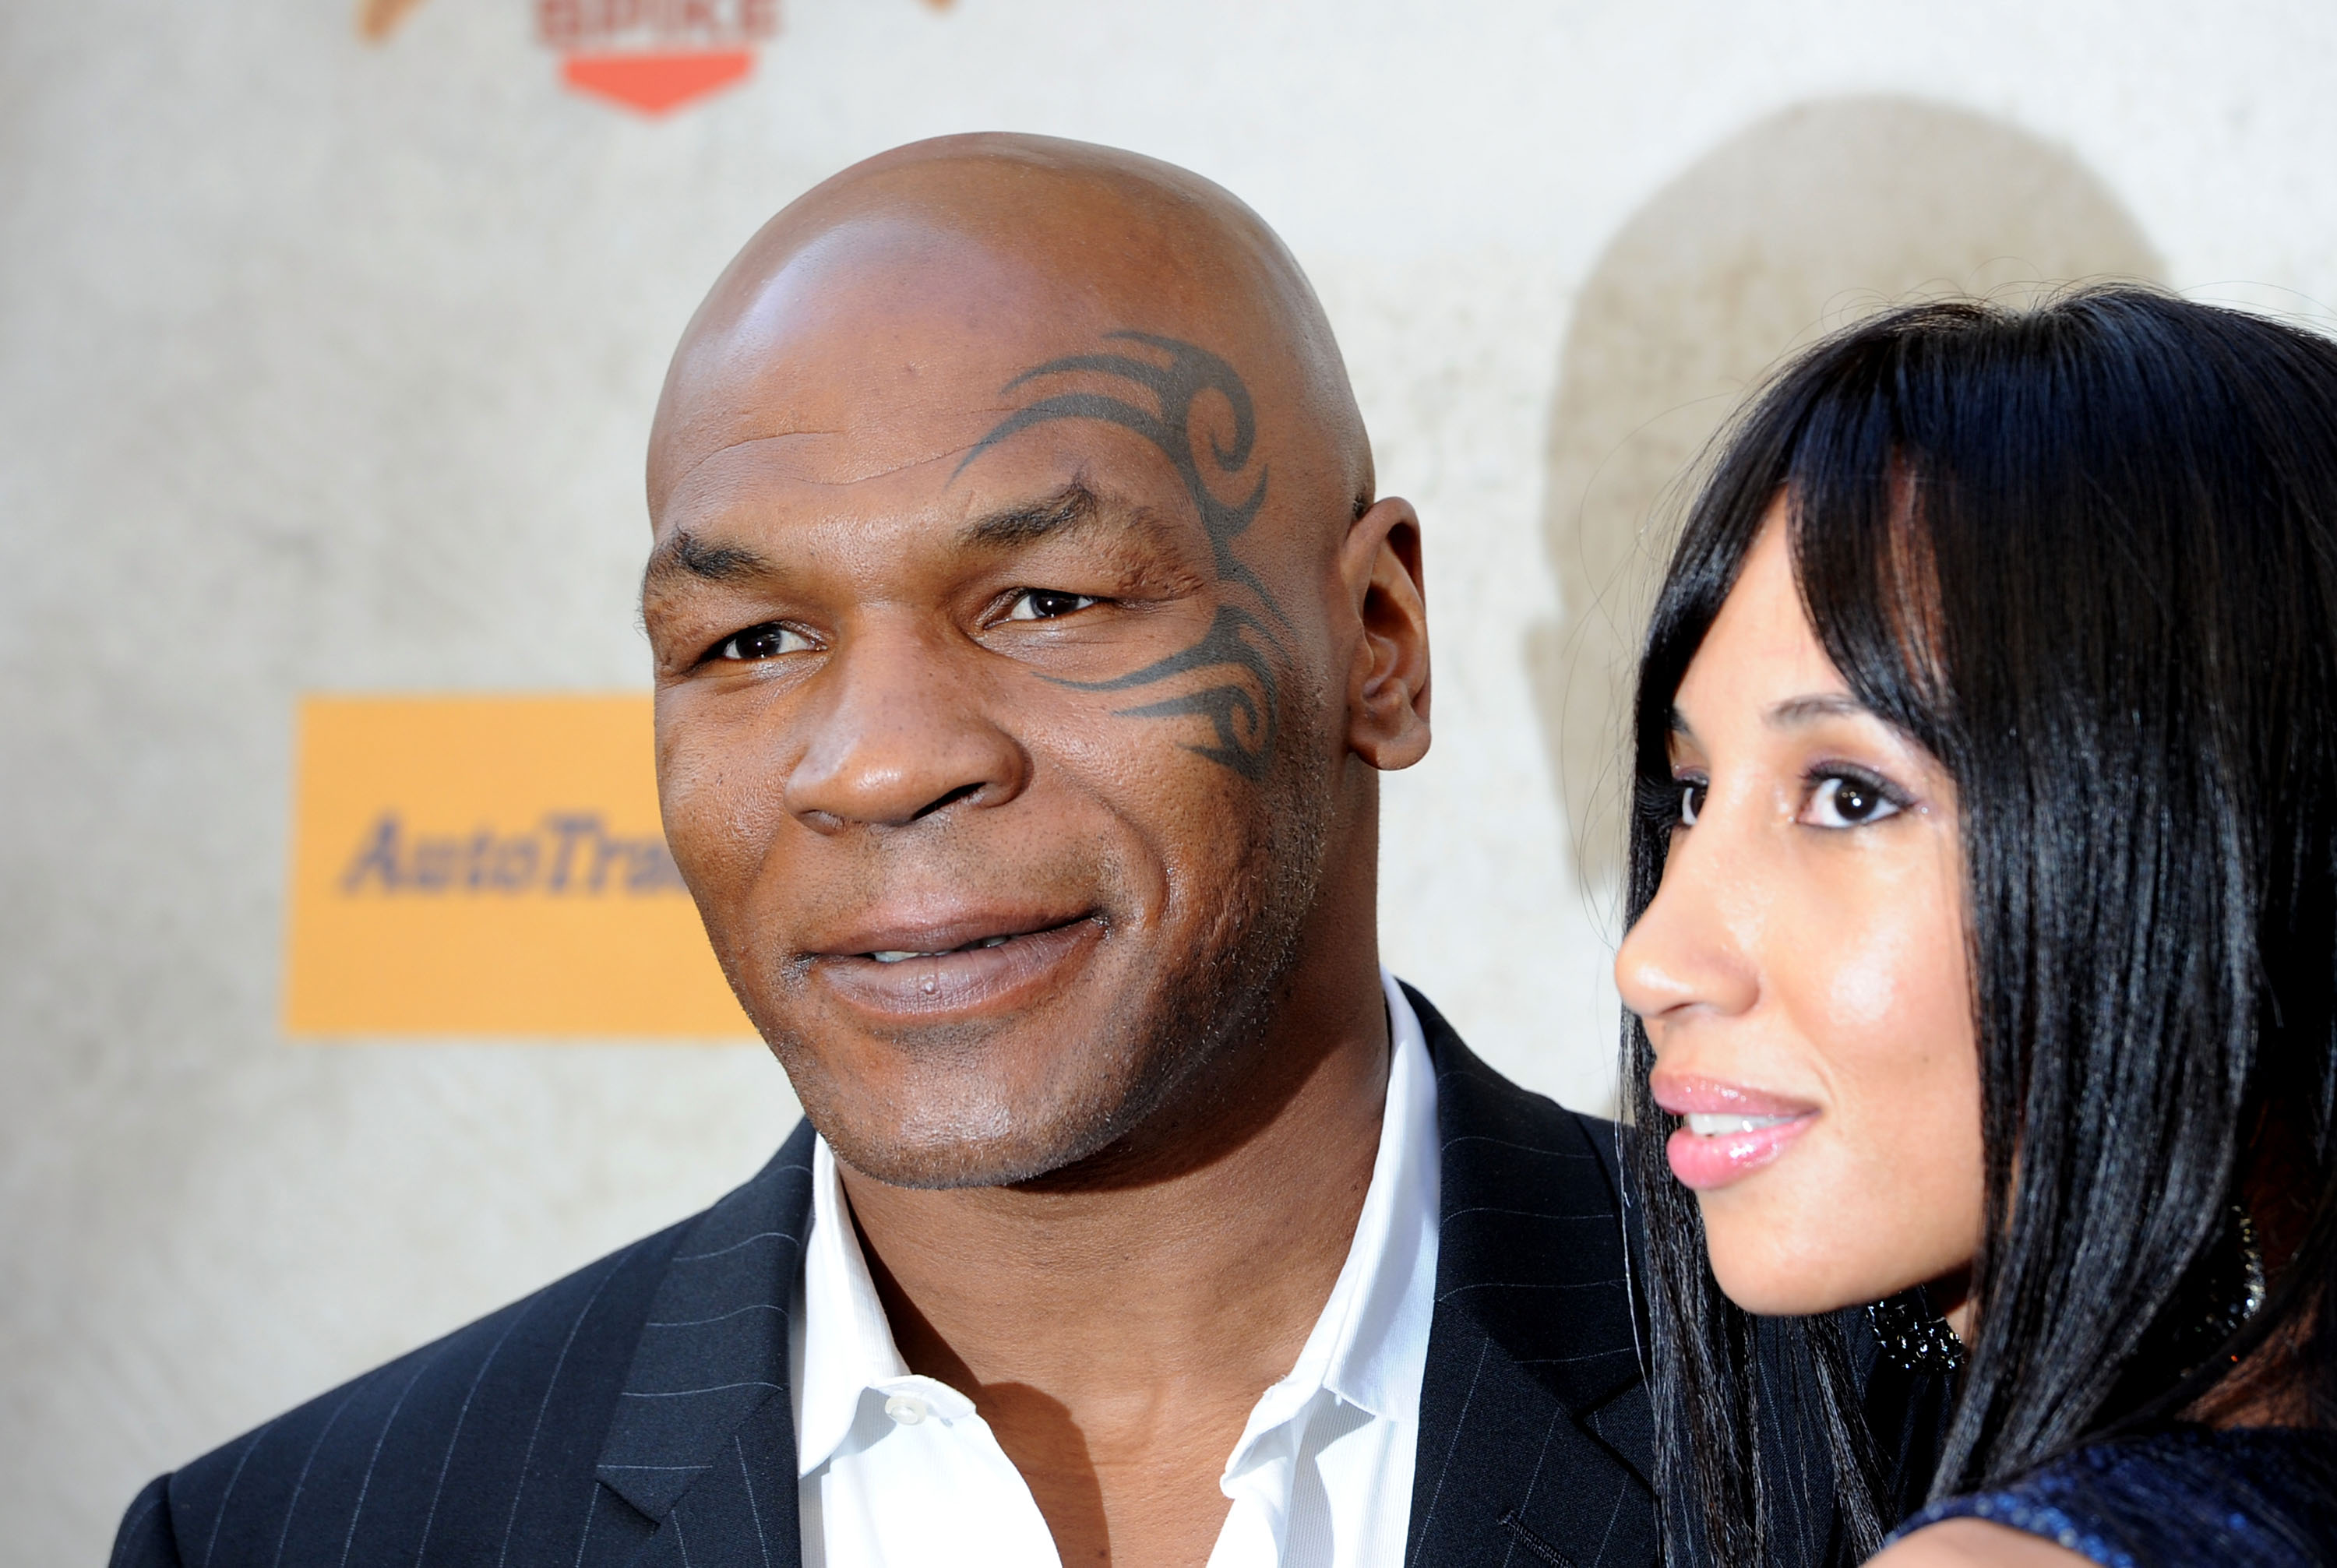 Mike Tyson is afraid to be the best he can be.